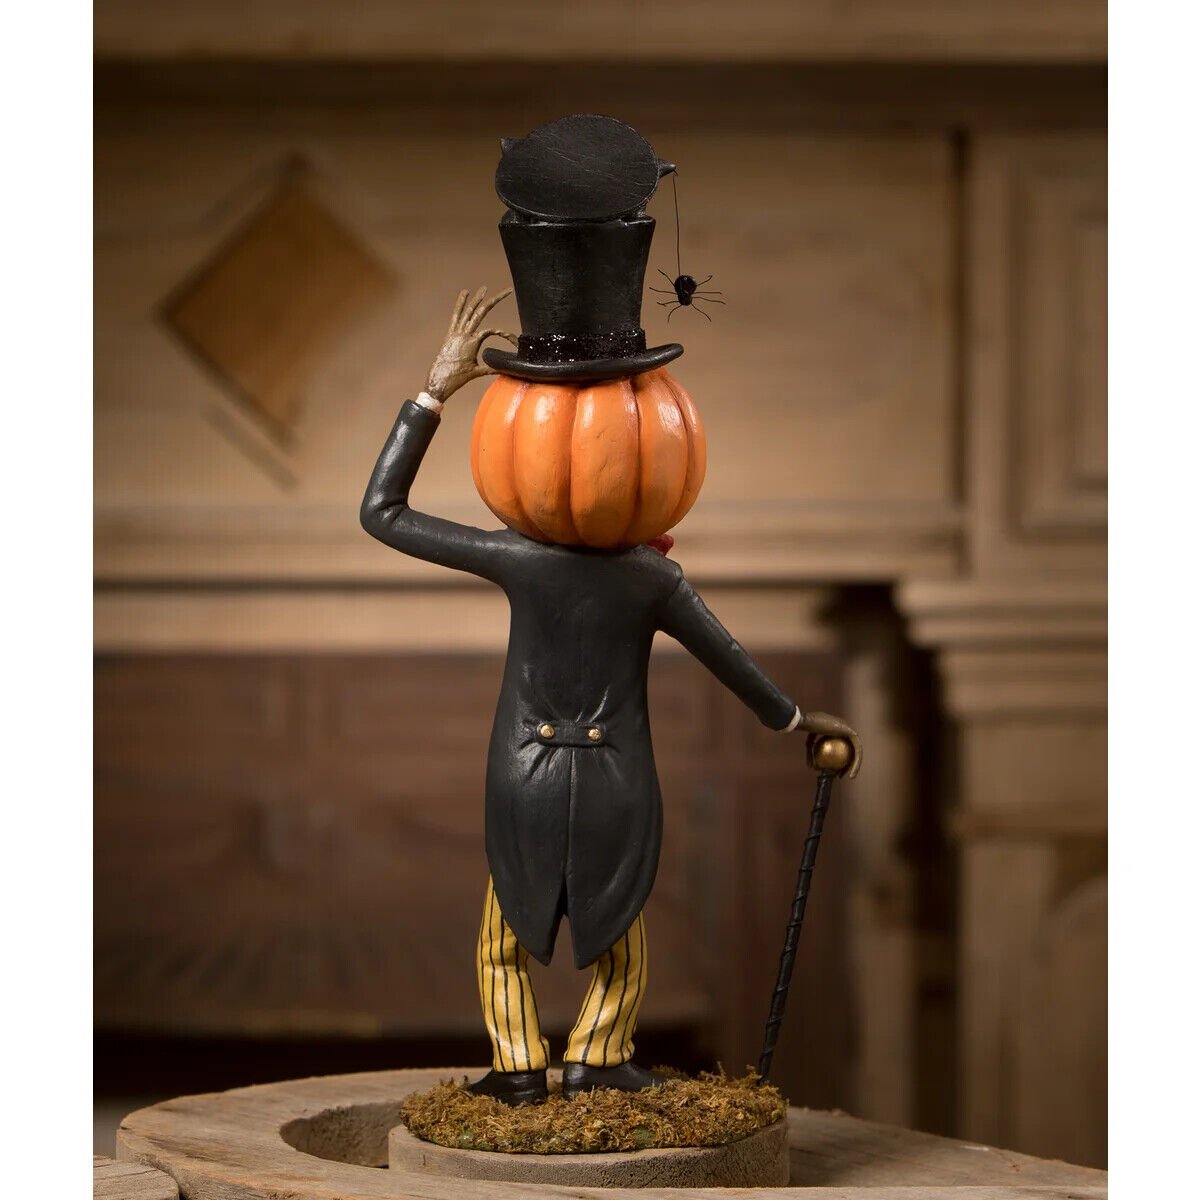 Bethany Lowe Halloween New 2023 Jaunty Jack Top Hat Figurine TD2209 - The Primitive Pineapple Collection